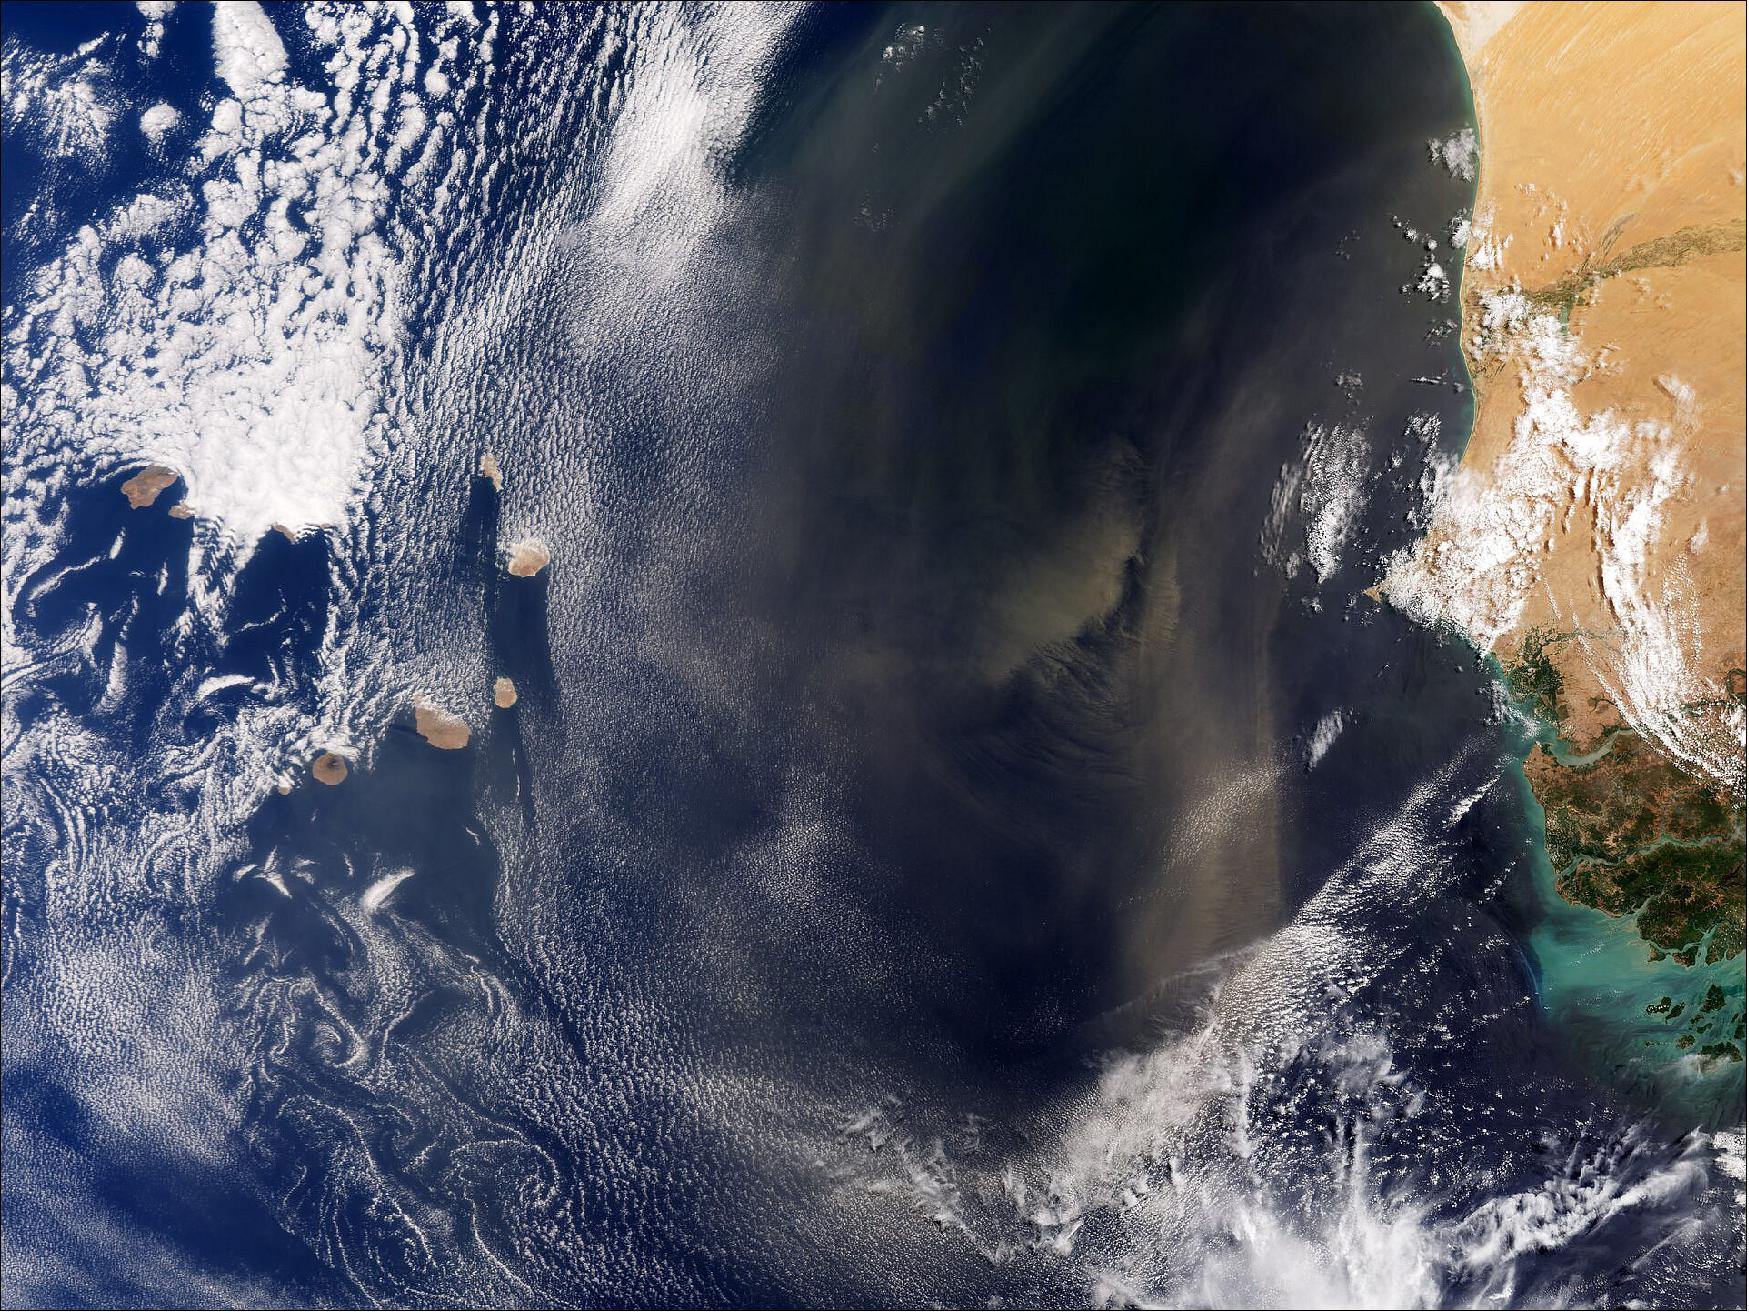 Figure 15: Desert dust blows from Africa. Captured by the Copernicus Sentinel-3 mission on 24 June 2021, this image shows desert dust blowing from the continent of Africa out across the Atlantic Ocean. Several of the small islands that make up the archipelago of Cabo Verde can be seen peeking out from beneath the clouds. These volcanic islands lie in the Atlantic Ocean about 570 km off the west coast of Senegal and Mauritania, which frame the image on the right. The sand comes mainly from the Sahara and Sahel region. Owing to Cabo Verde's position and the trade winds, these storms are not uncommon. - During September 2021, Cabo Verde is the site of an extensive field campaign to validate data from ESA's Aeolus wind mission (image credit: ESA, the image contains modified Copernicus Sentinel-3 data (2021), processed by ESA, CC BY-SA 3.0 IGO)